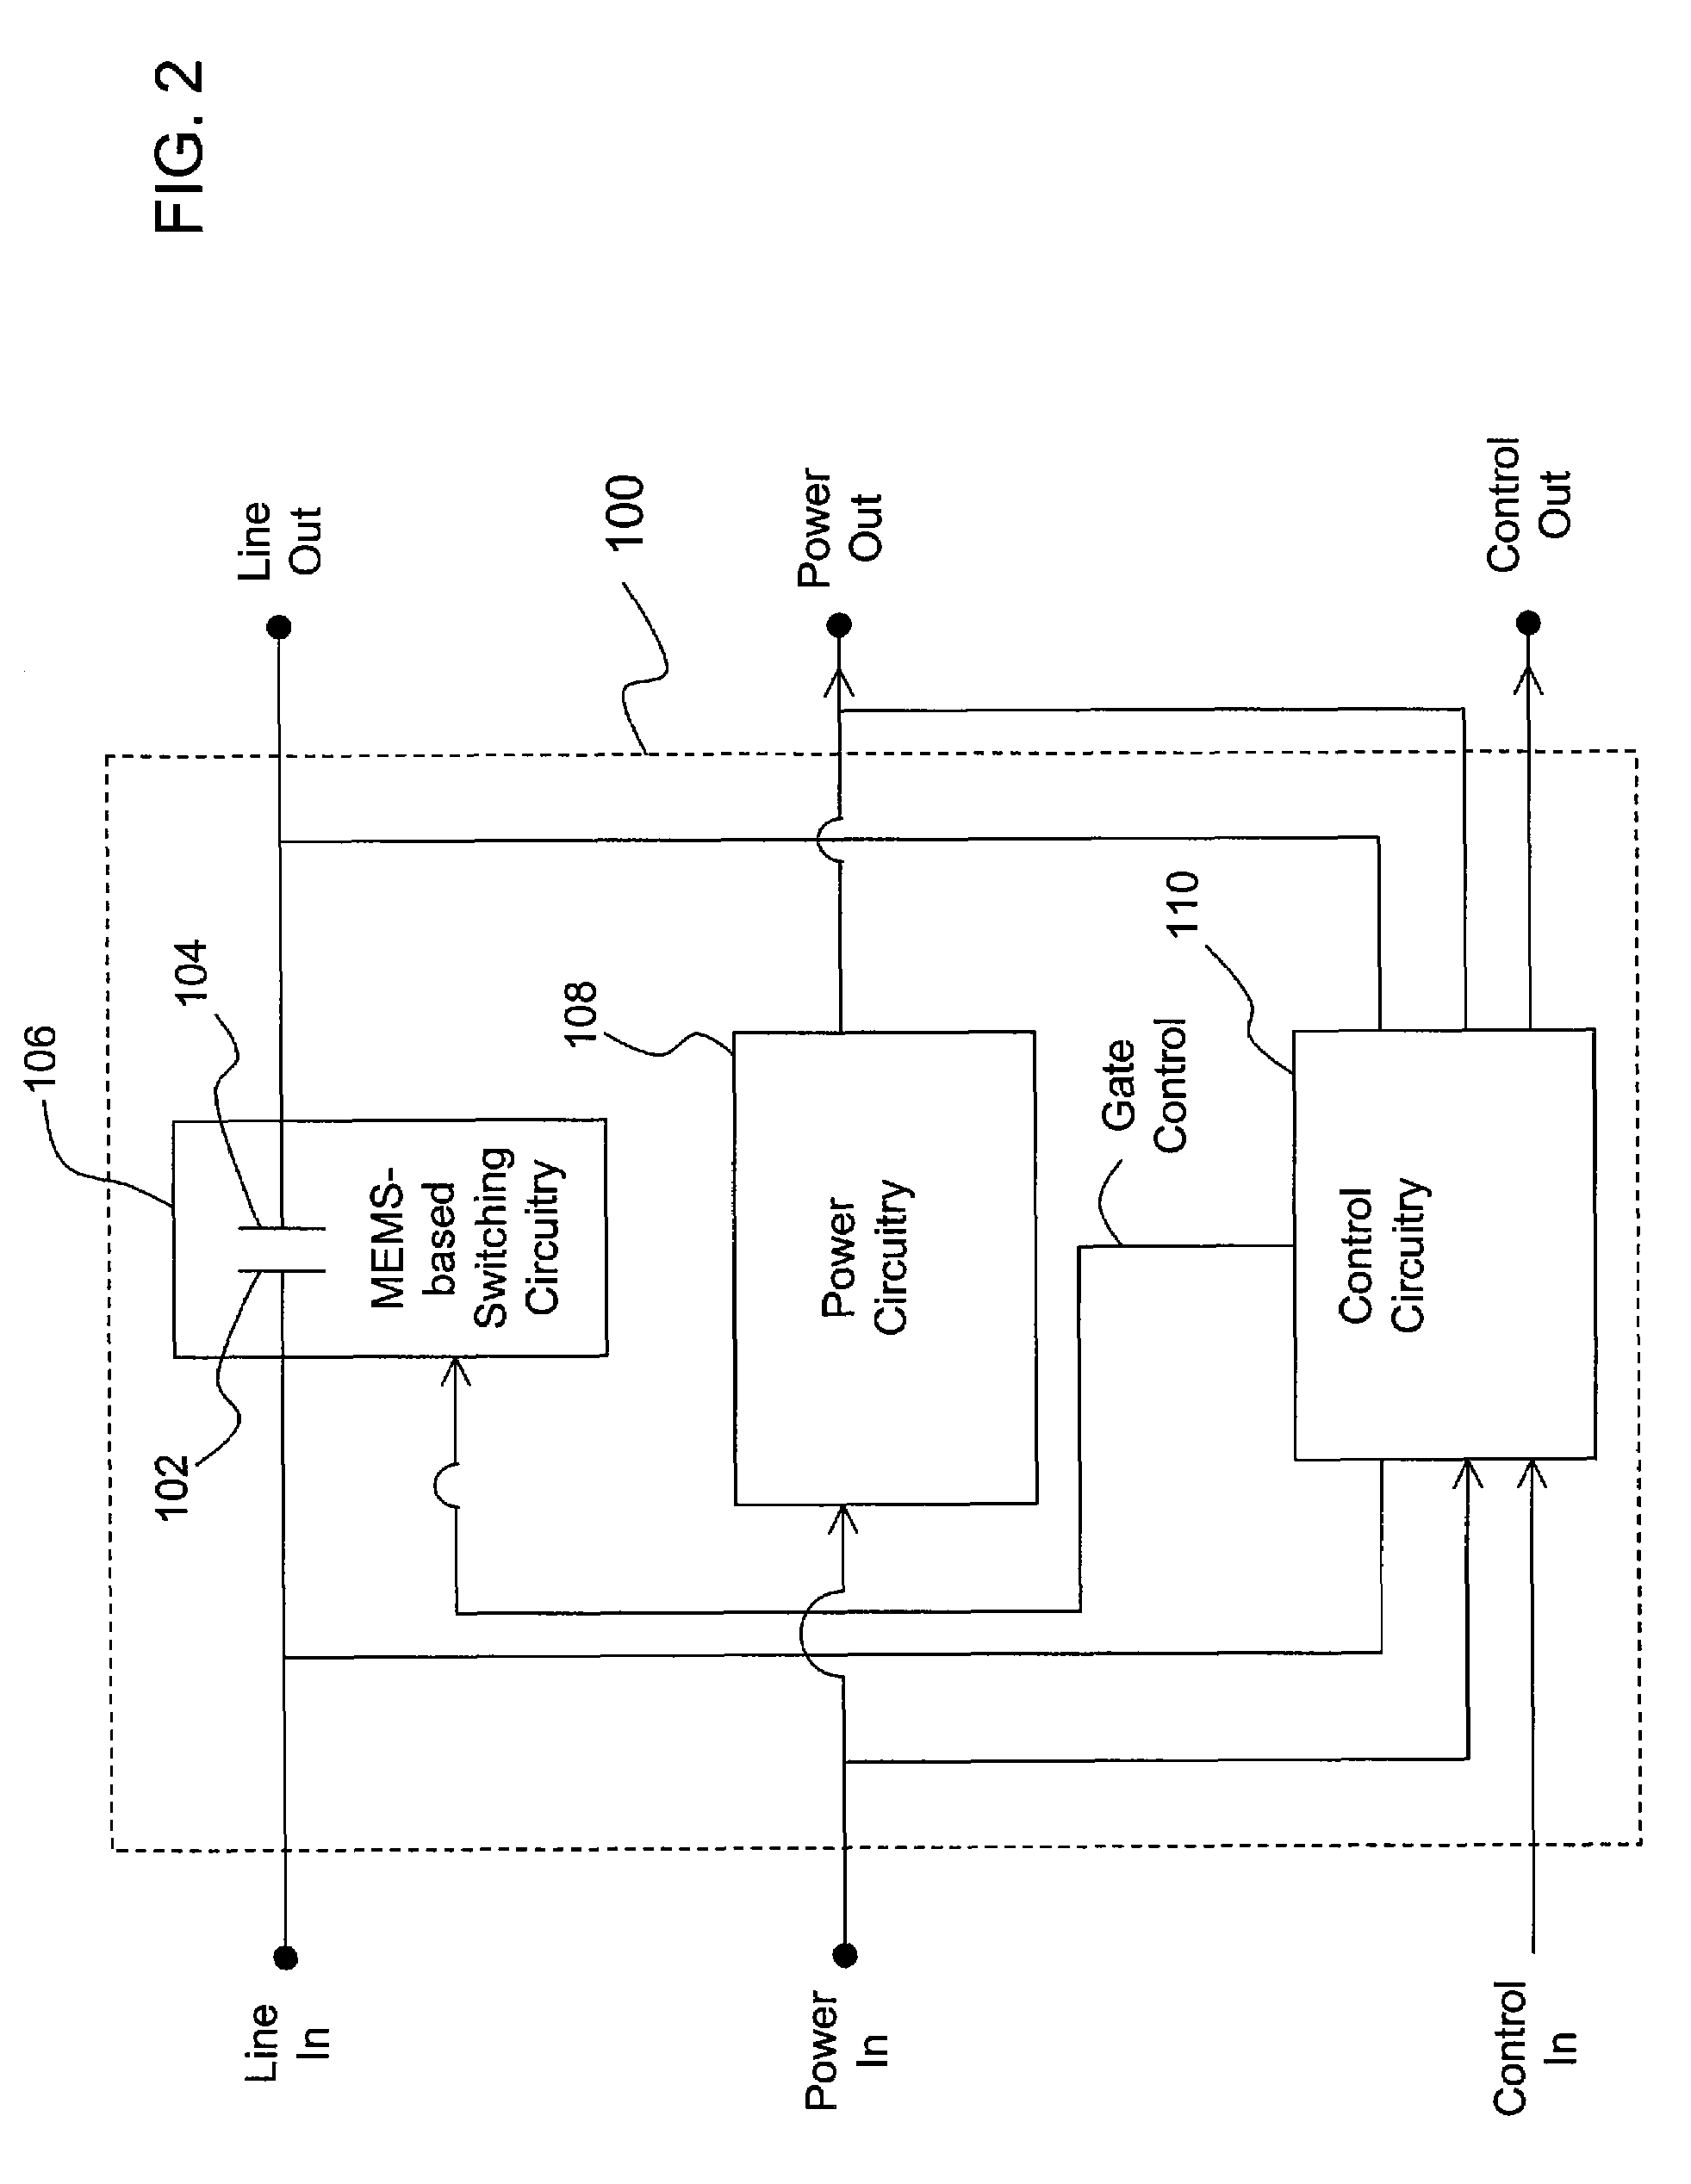 Micro-electromechanical system based switching module serially stackable with other such modules to meet a voltage rating